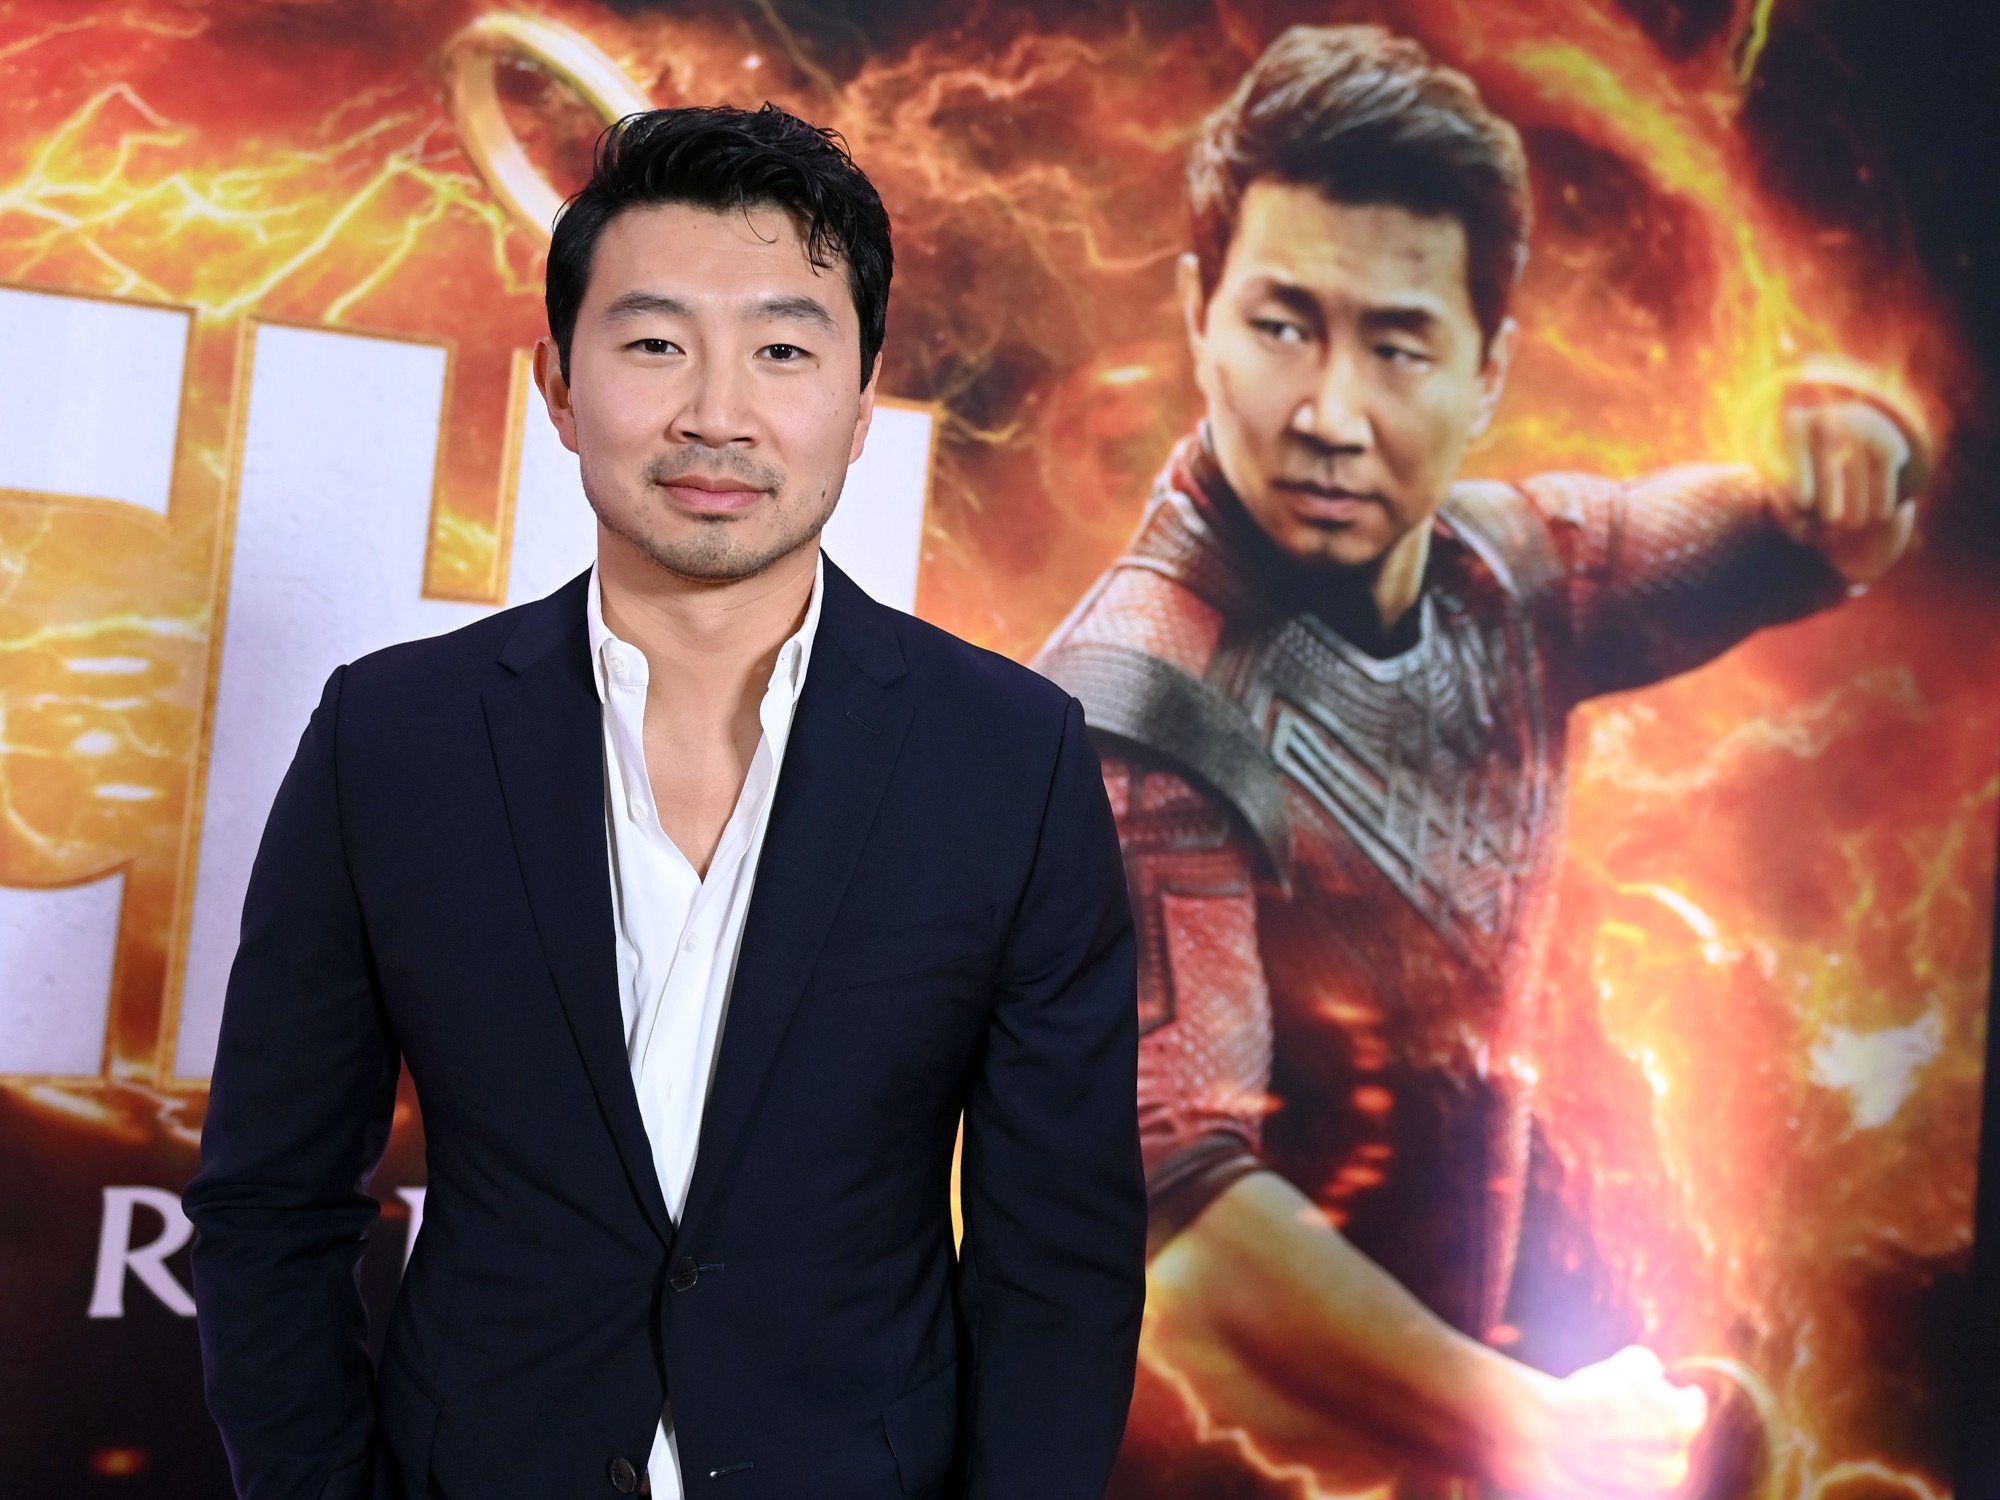 Marvel star Simu Liu at the premiere for 'Shang-Chi and the Legend of the Ten Rings.' He's wearing a white button-up shirt and black jacket. He's staring at the camera and standing in front of an image of his character, Shang-Chi. He appears in 1 of the end-credits scenes for 'Shang-Chi.'